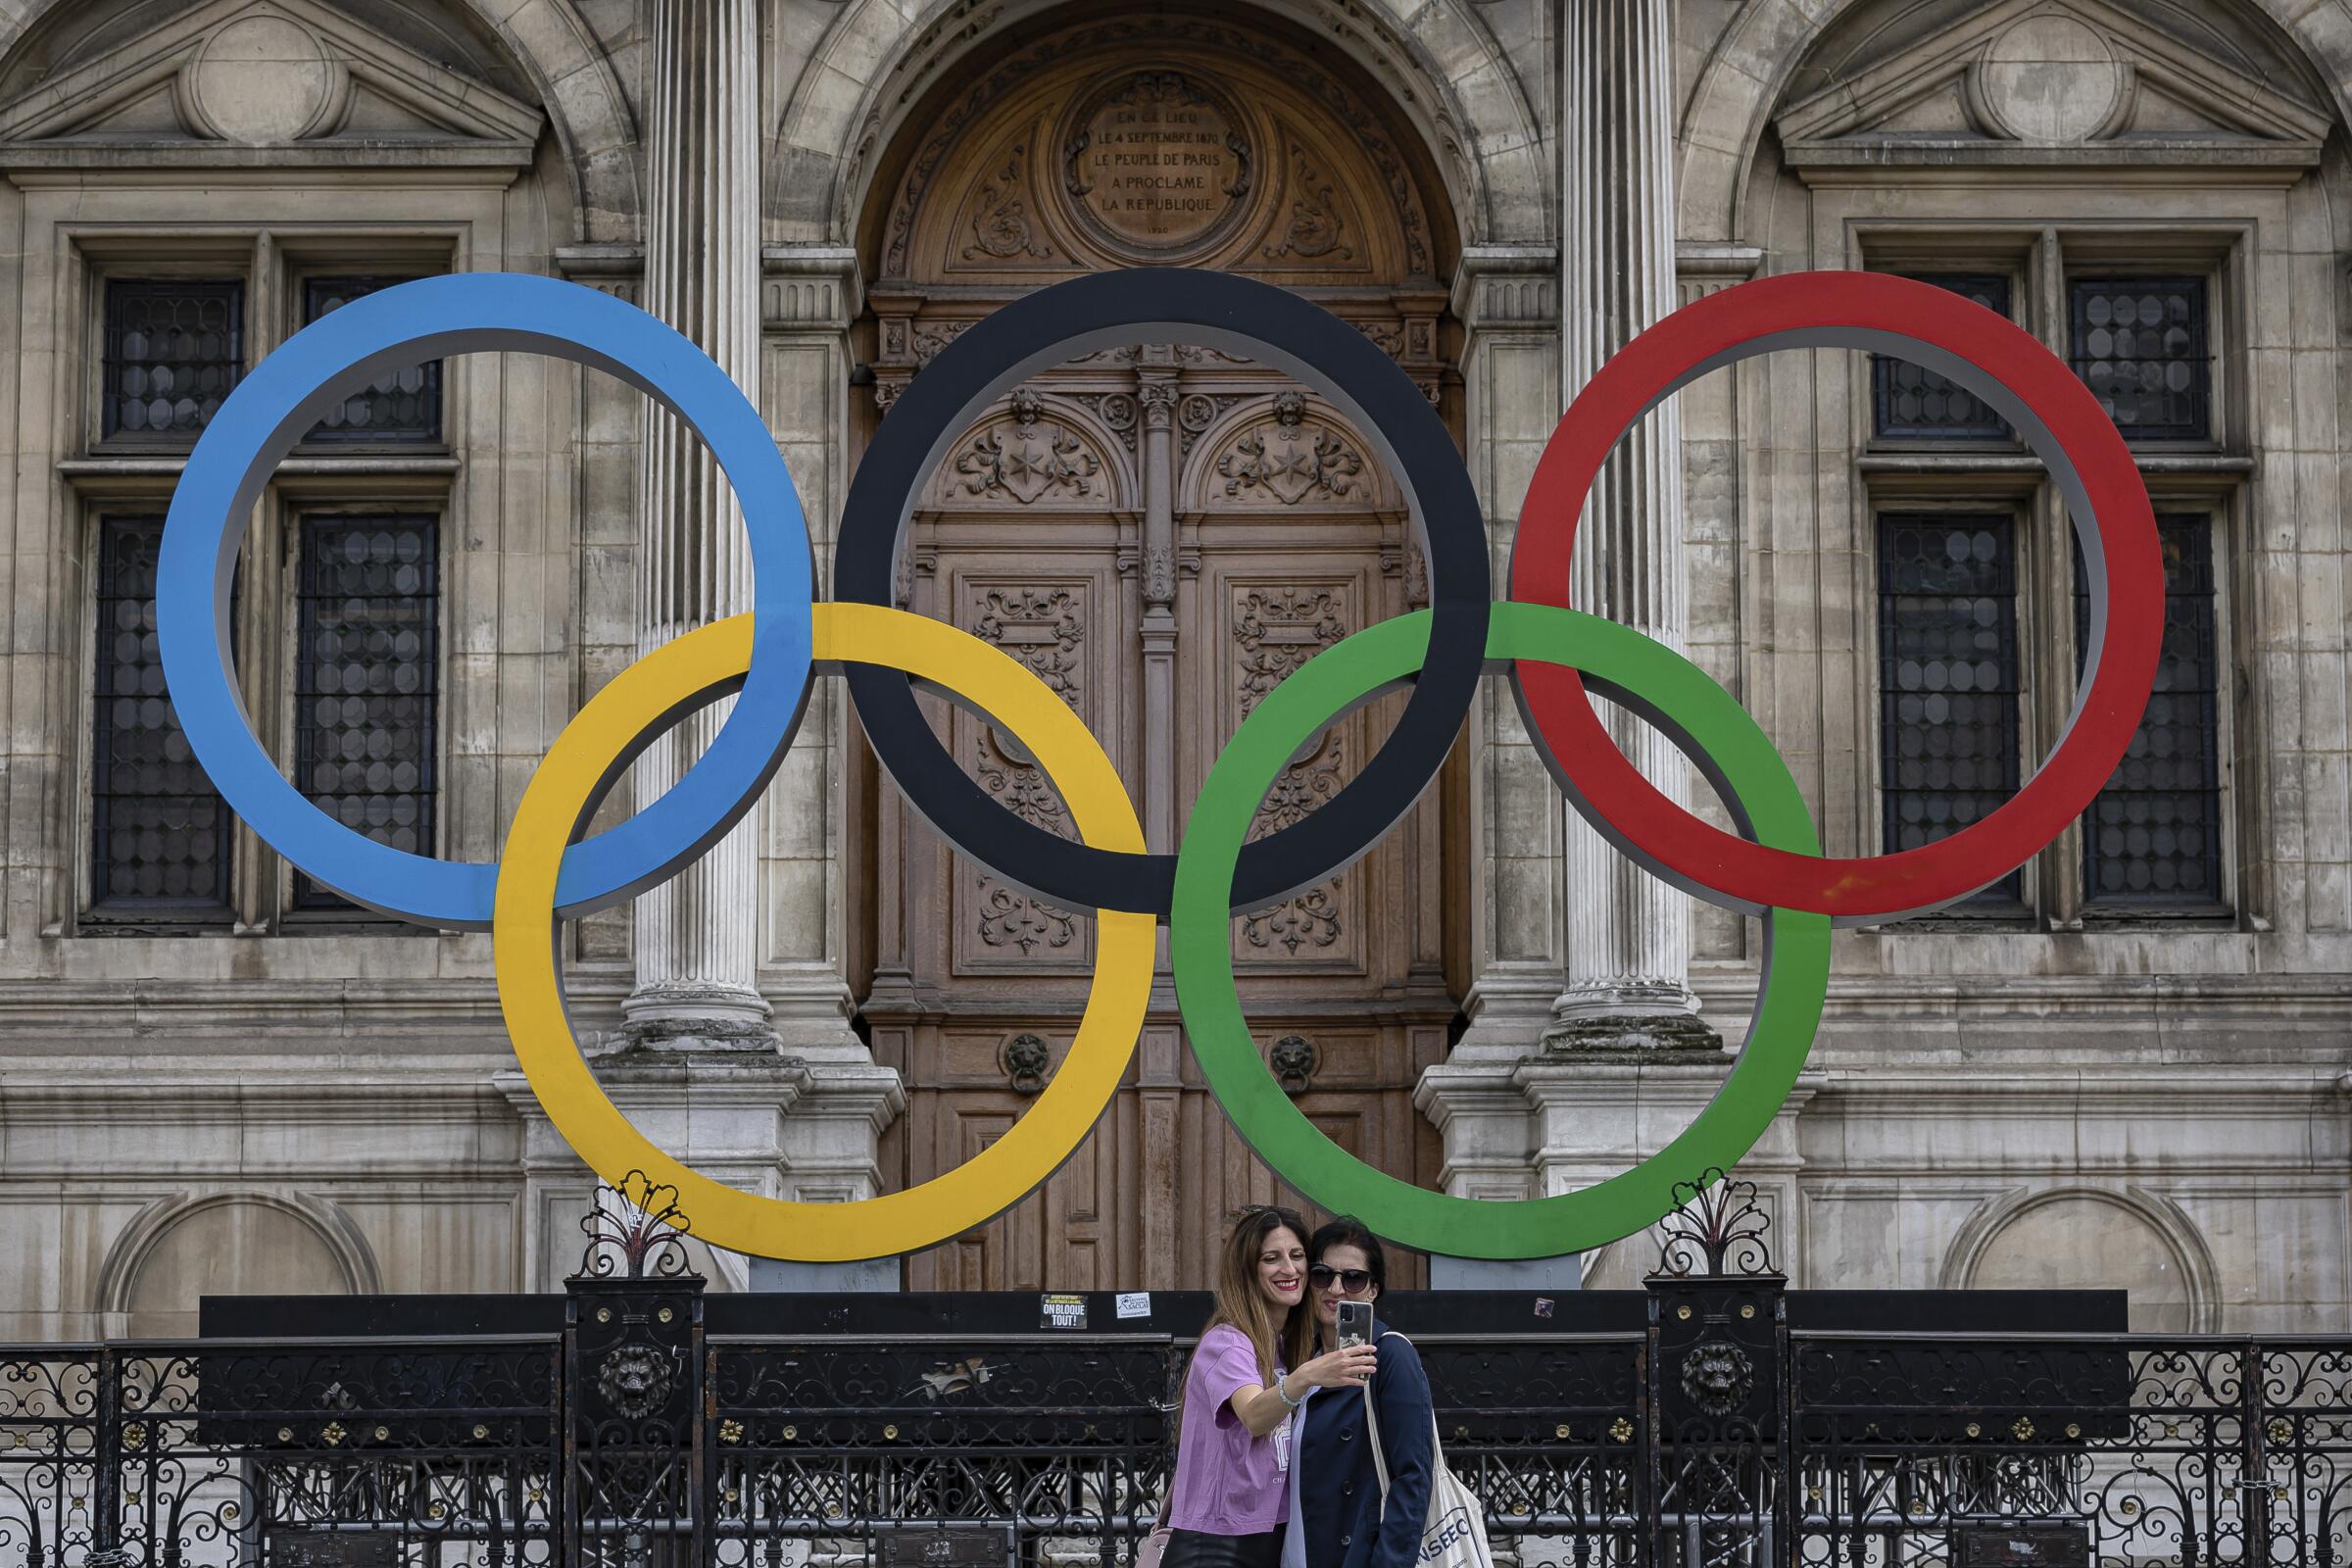 People take a photograph in front of the Olympic rings at Paris City Hall.